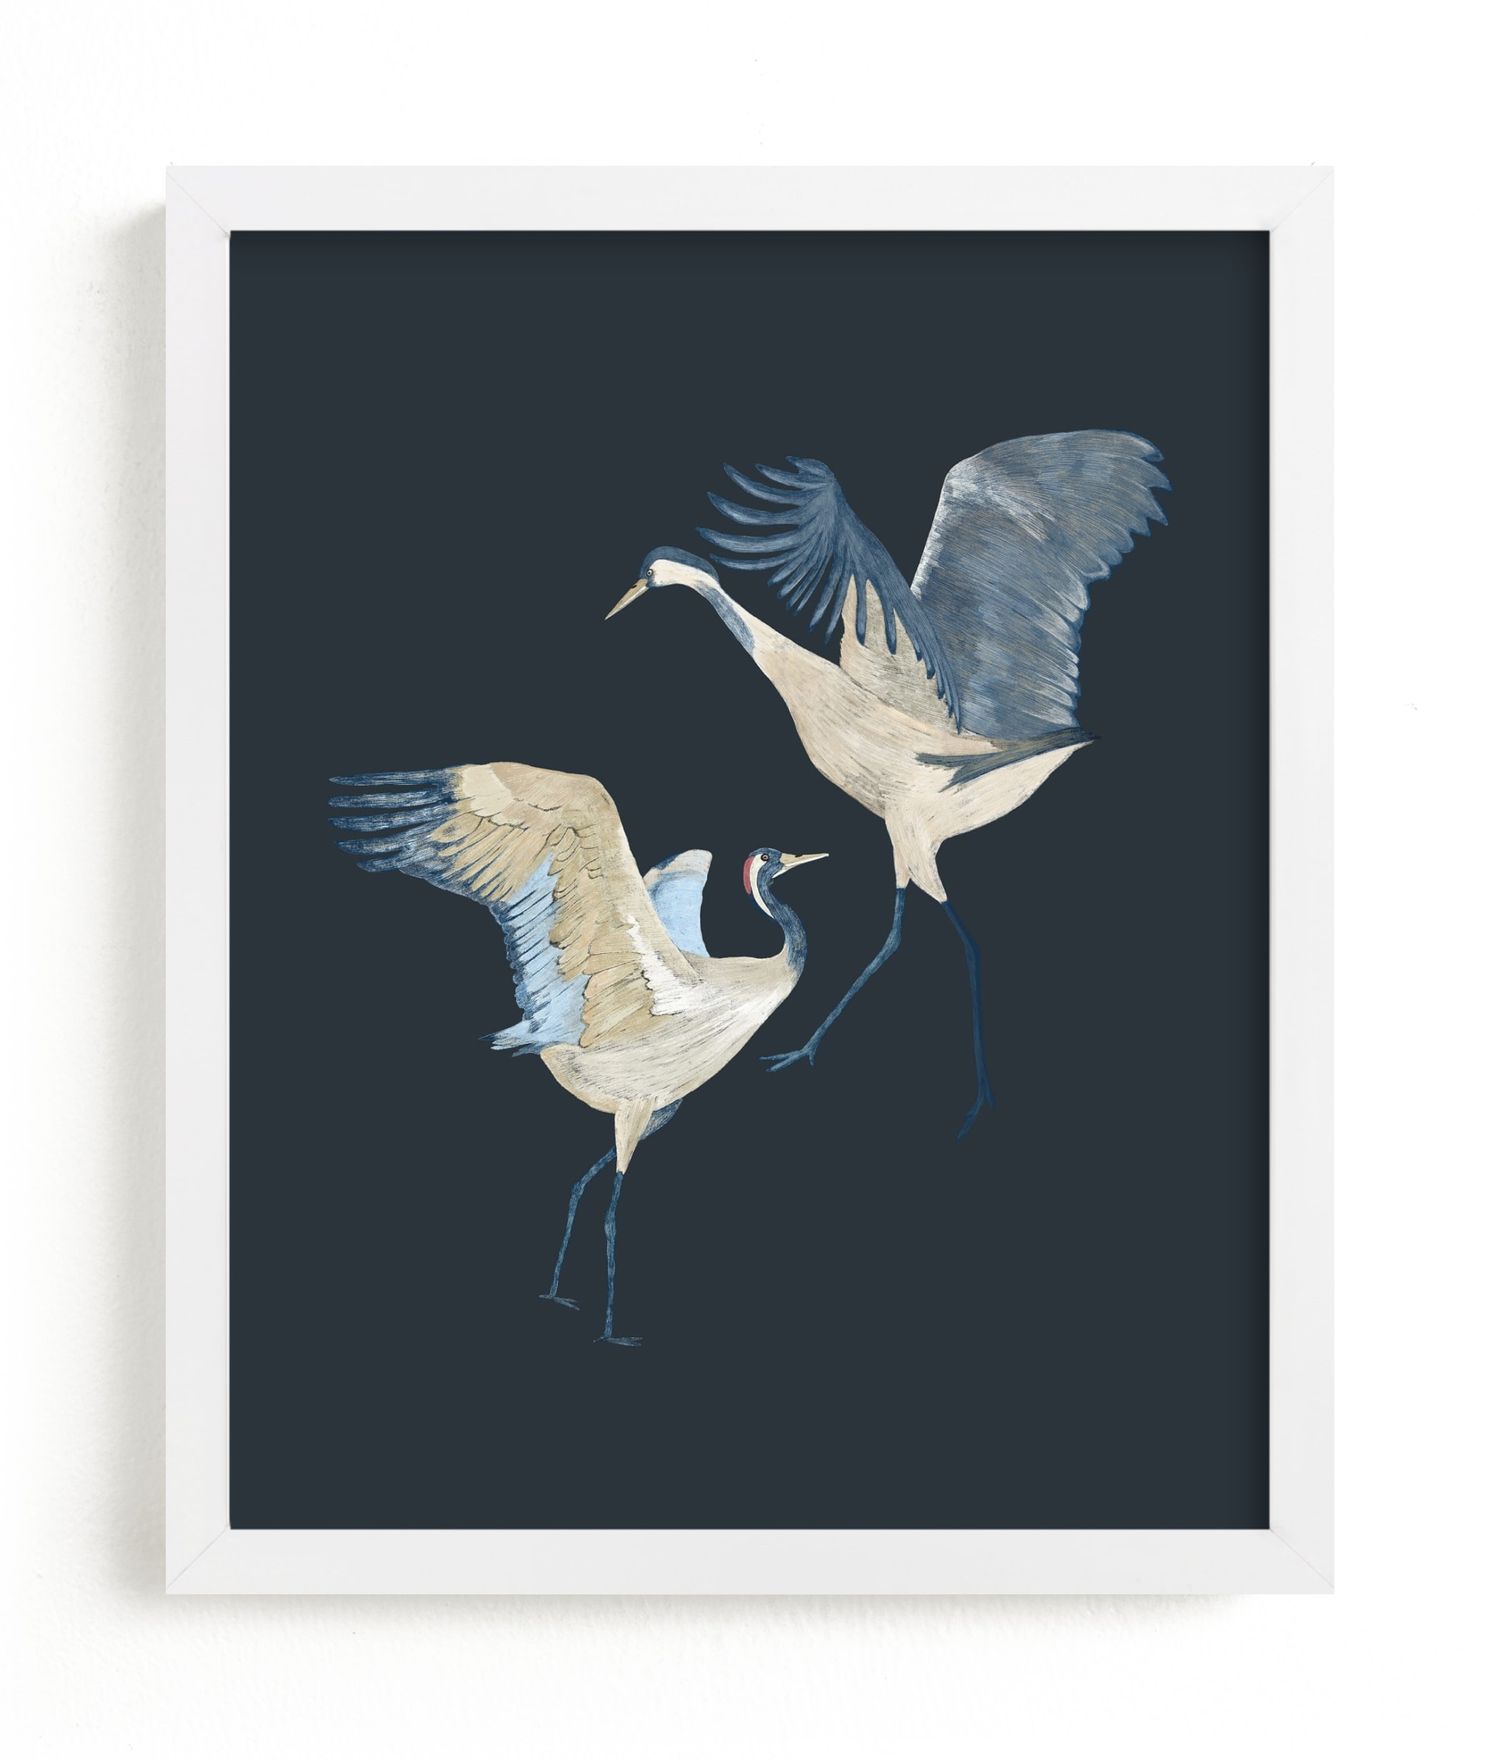 Shop Crane Dance by Nina Leth on Canvas, (8x10)  from Minted on Openhaus